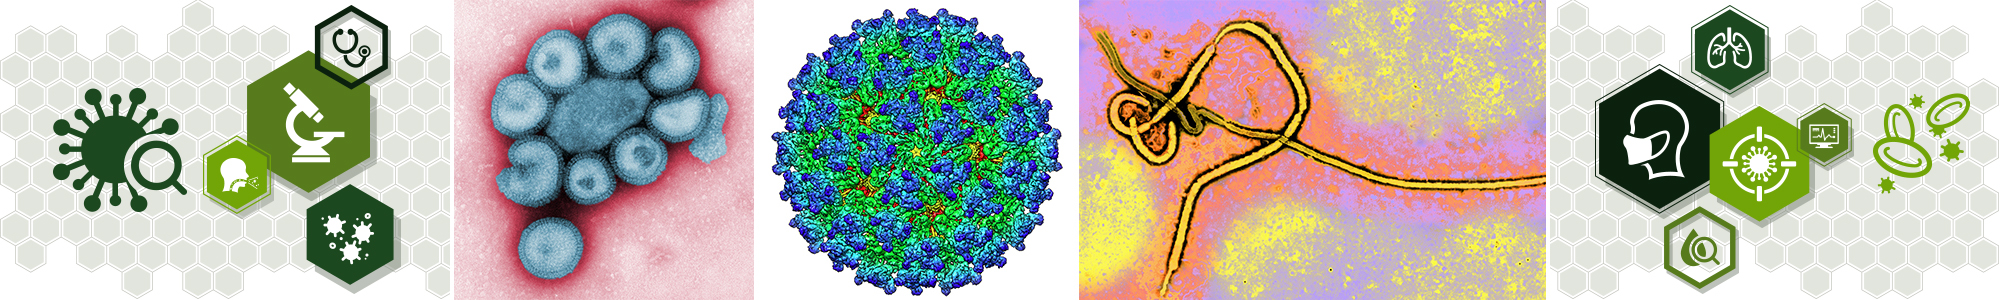 Images of Viruses and Bacteria